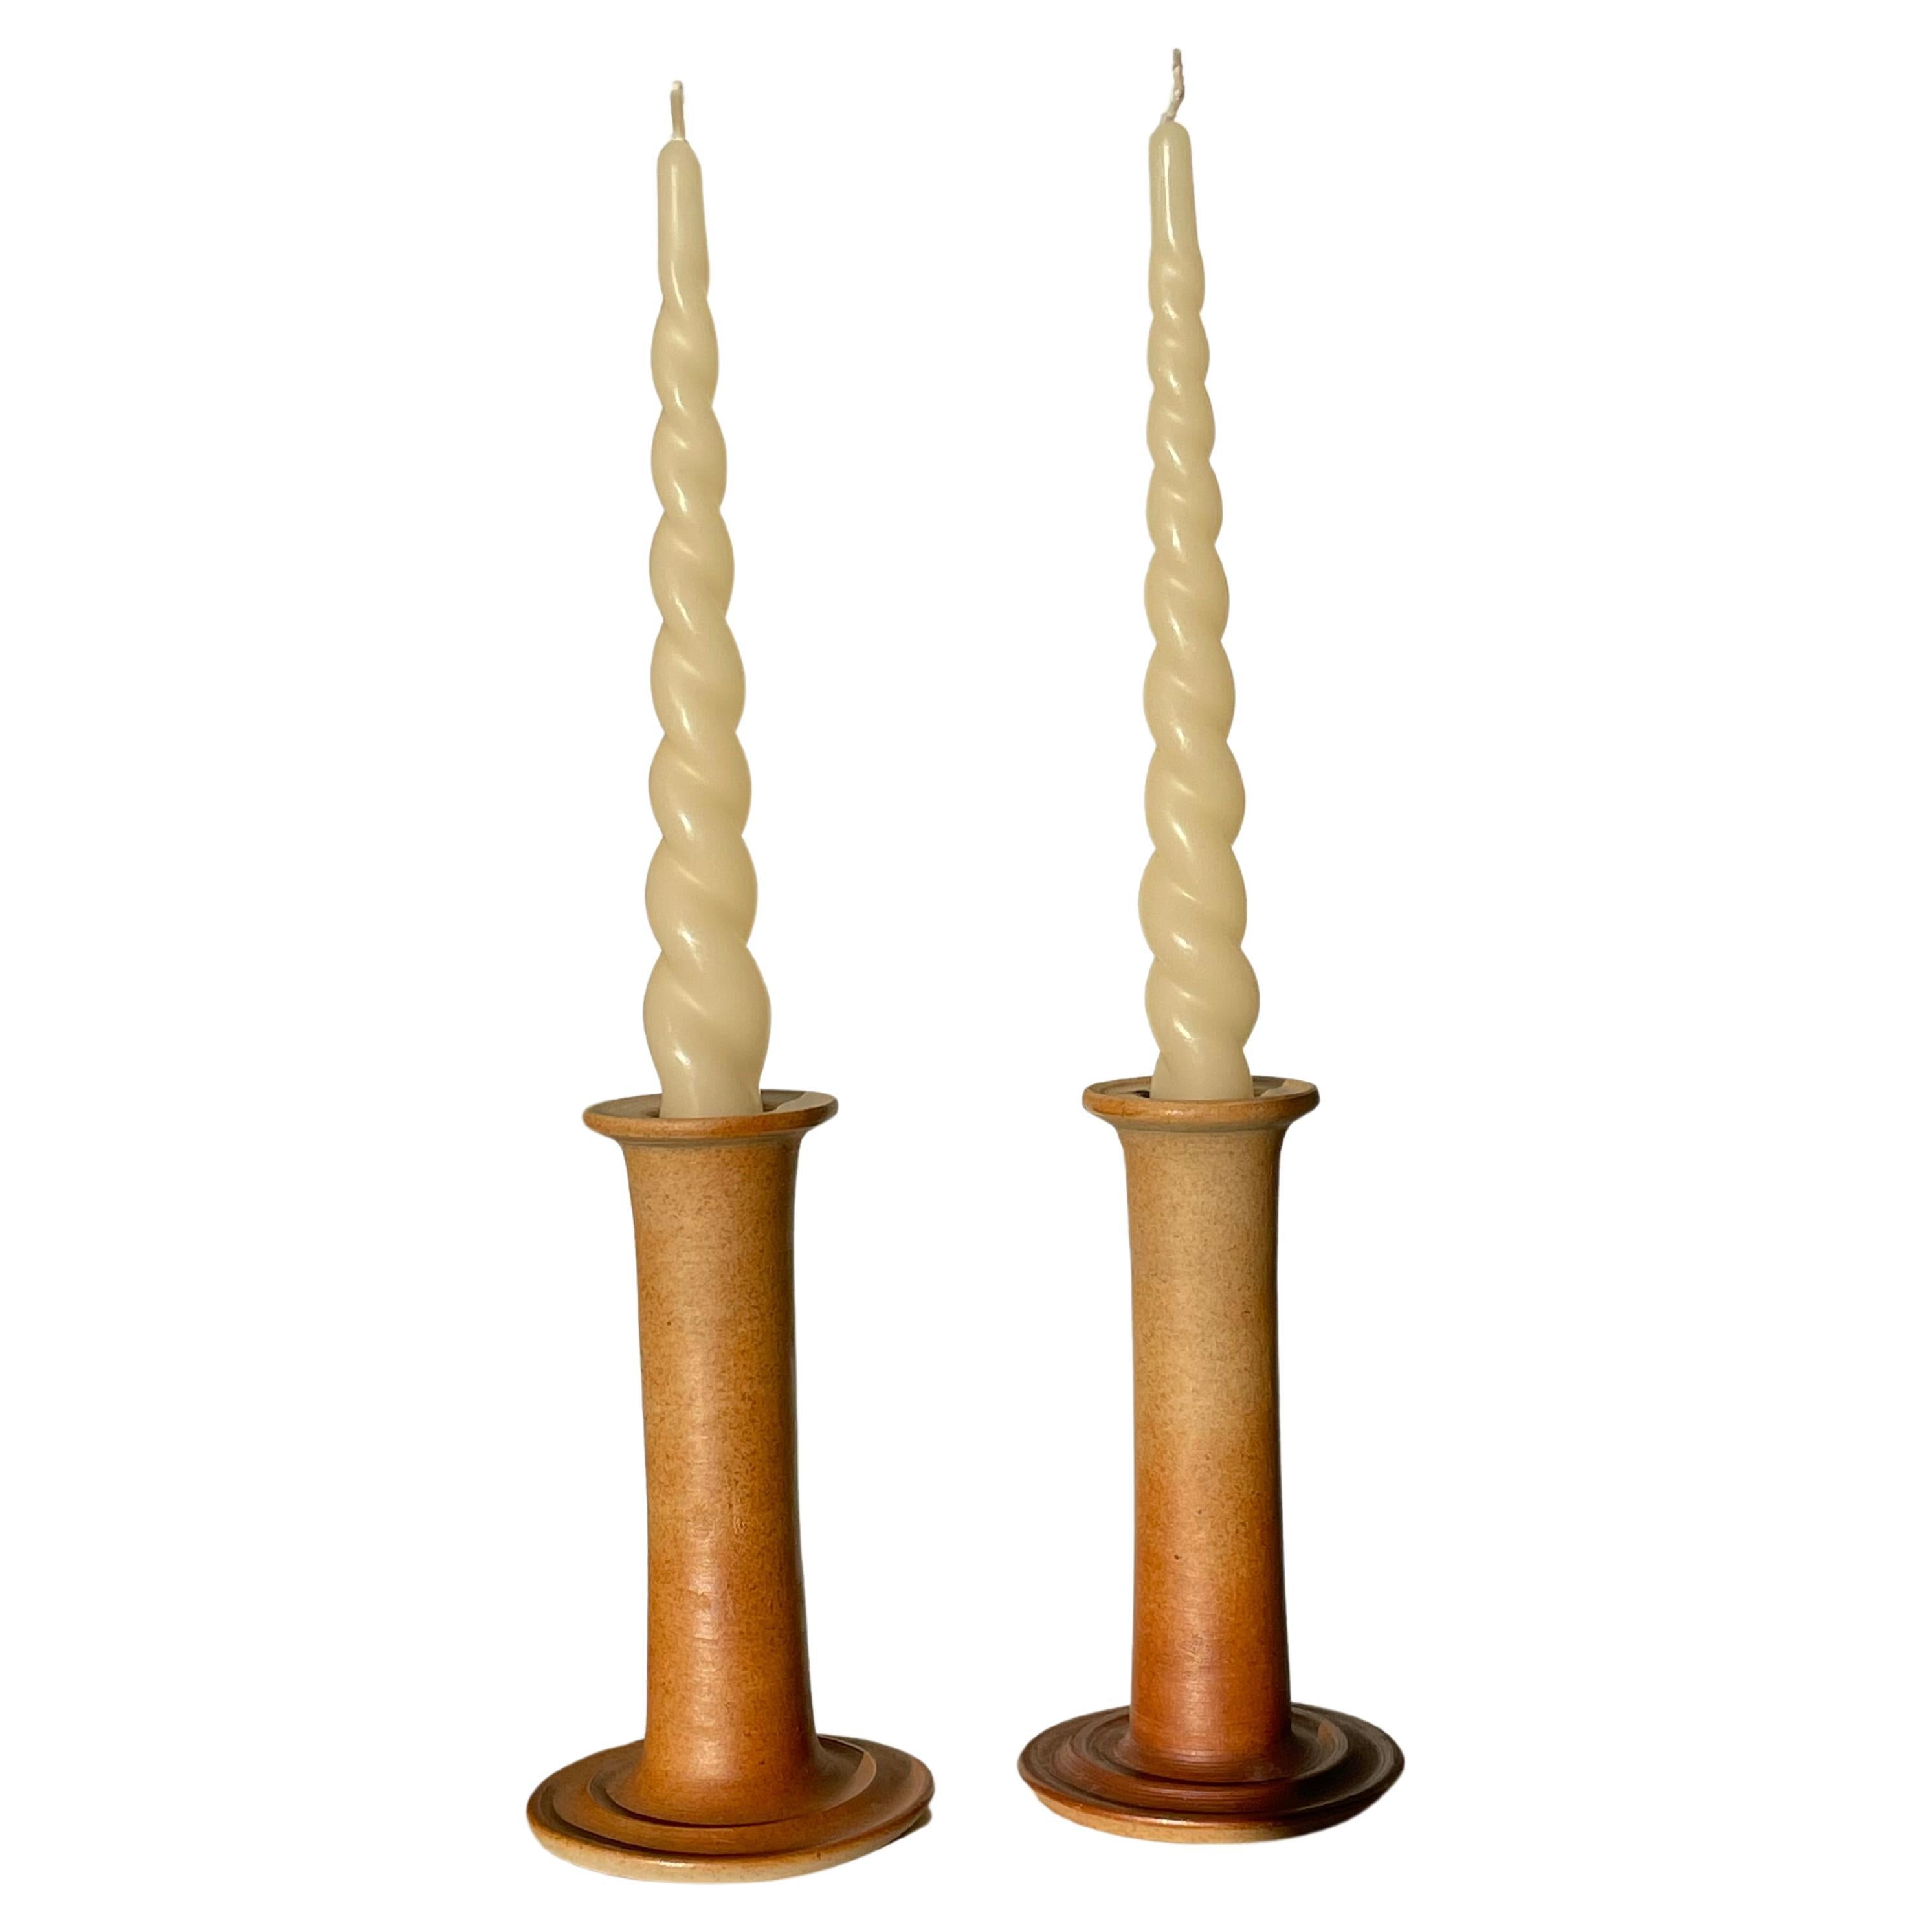 Pair of J. Packness Tawny Ceramic Candle Sticks, 1970s For Sale